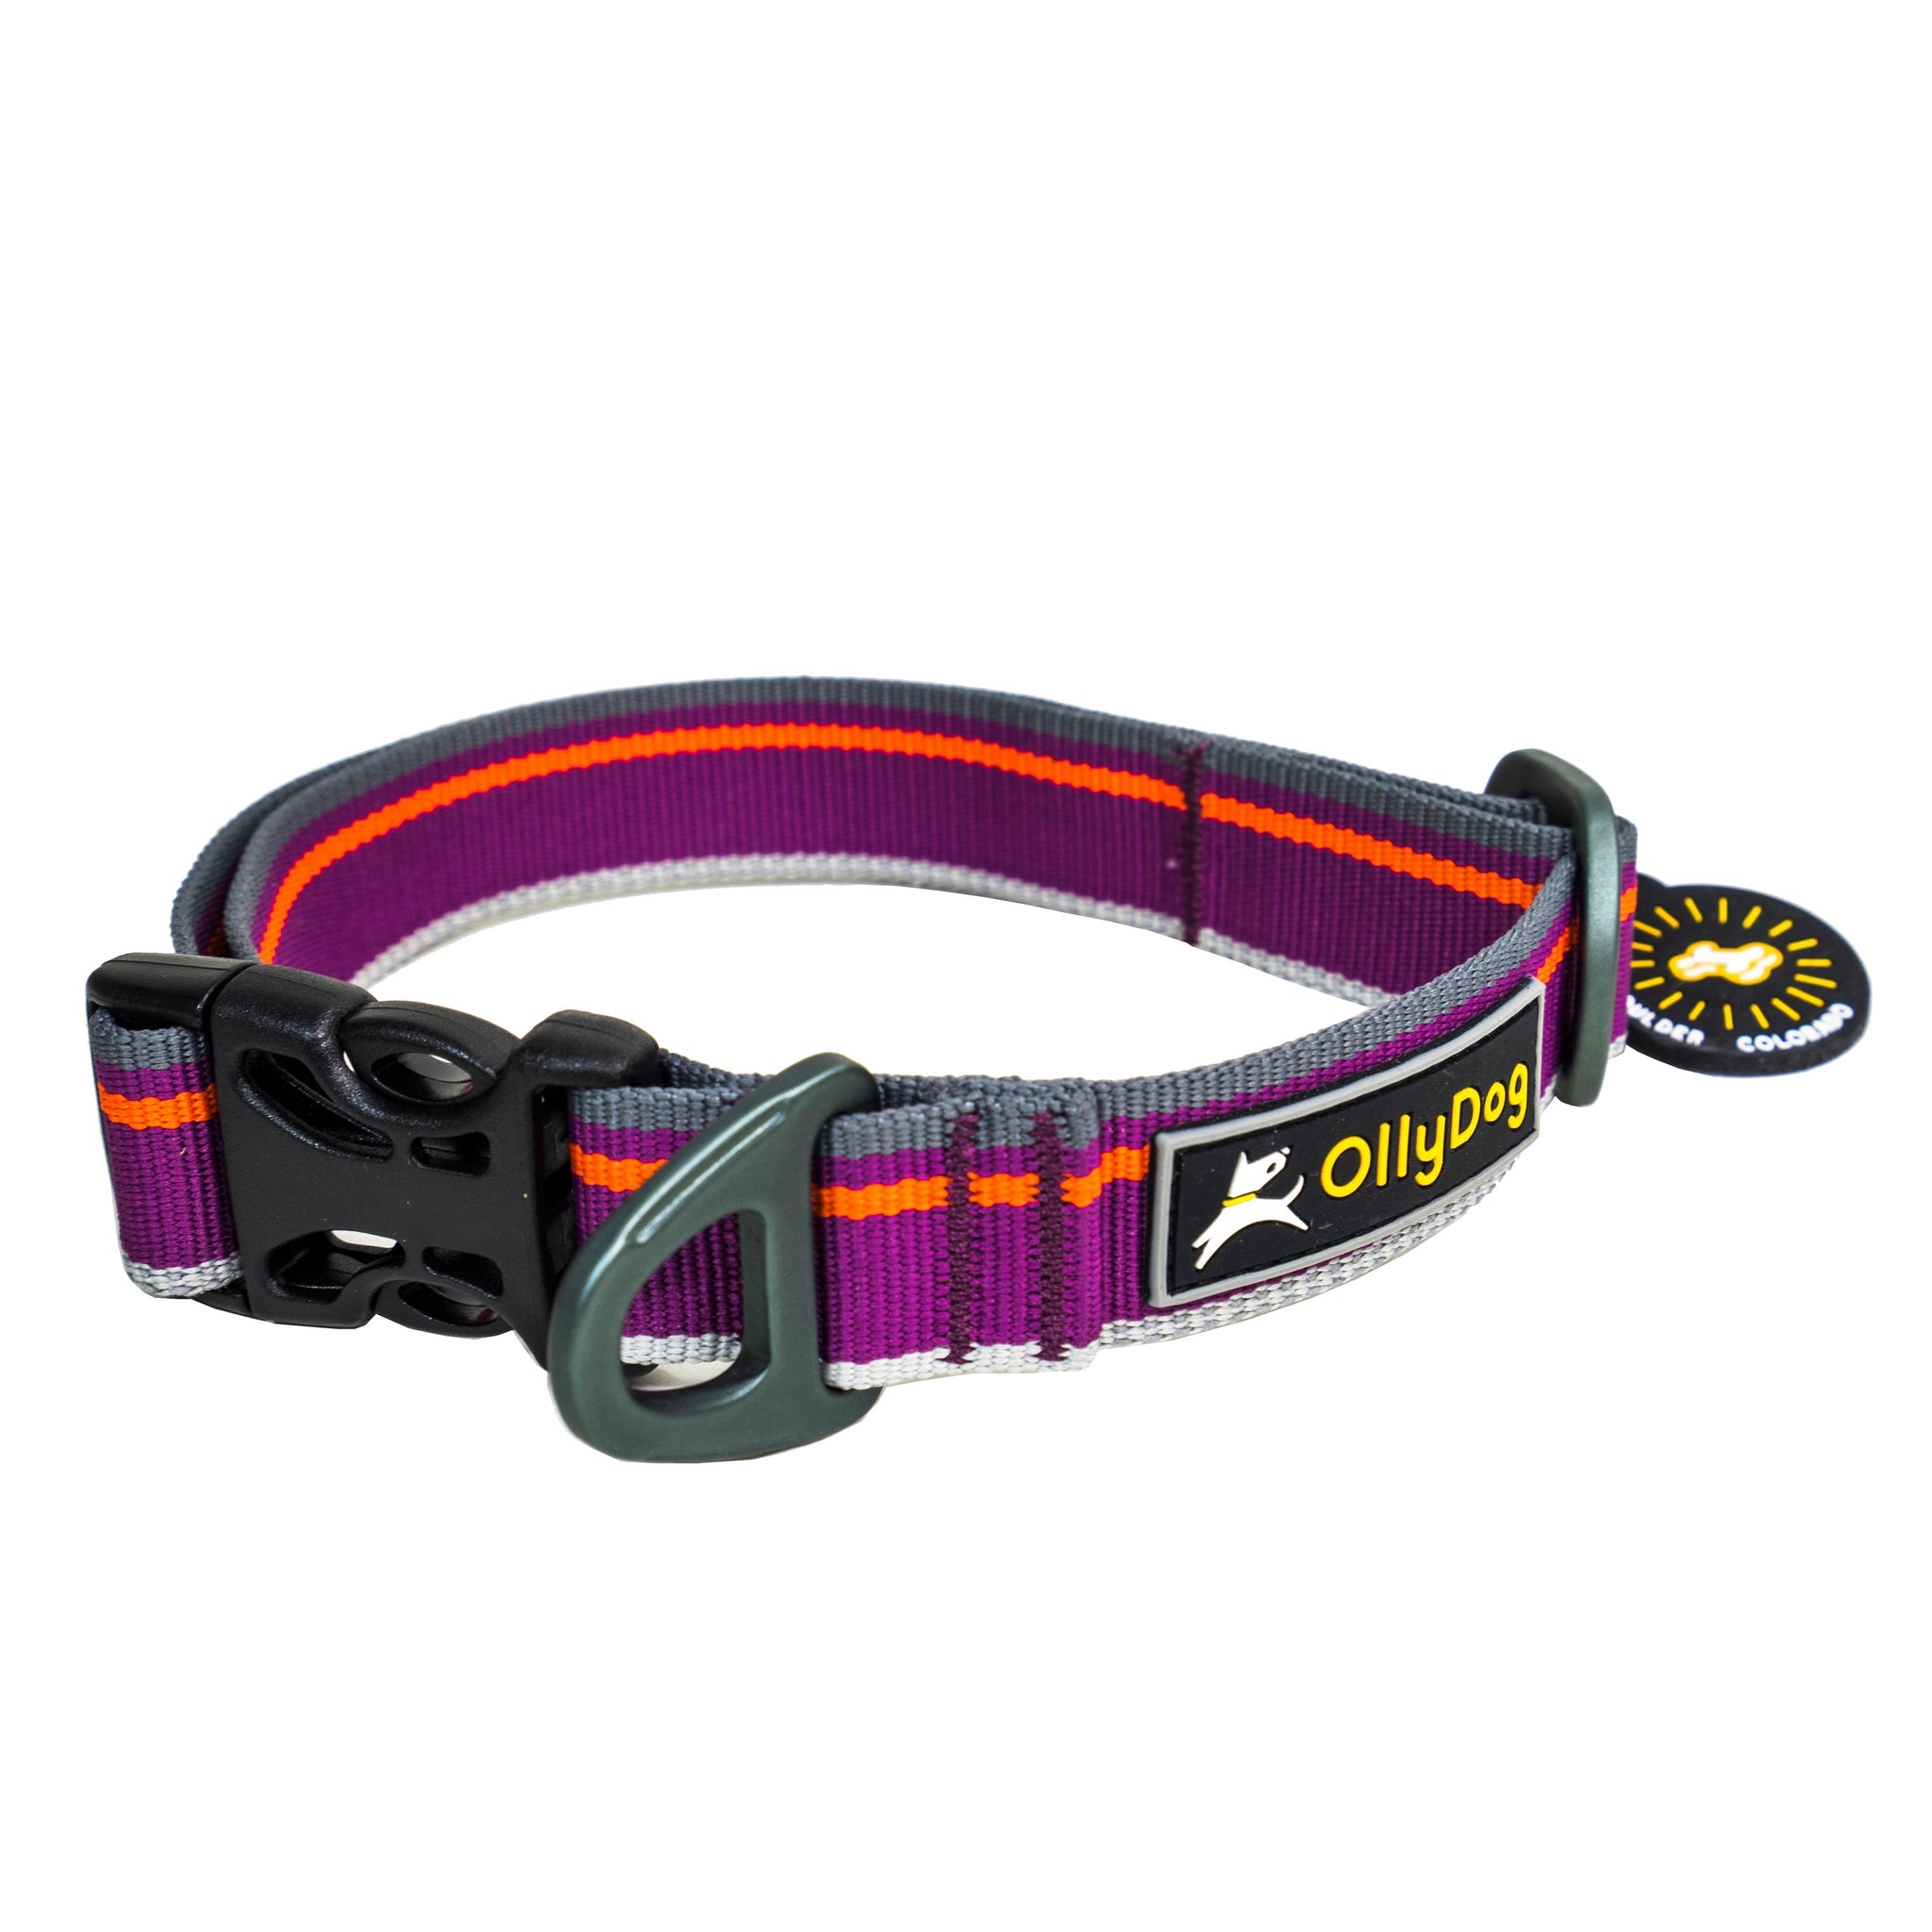 Urban Journey Reflective Collar- Save 20% at Checkout